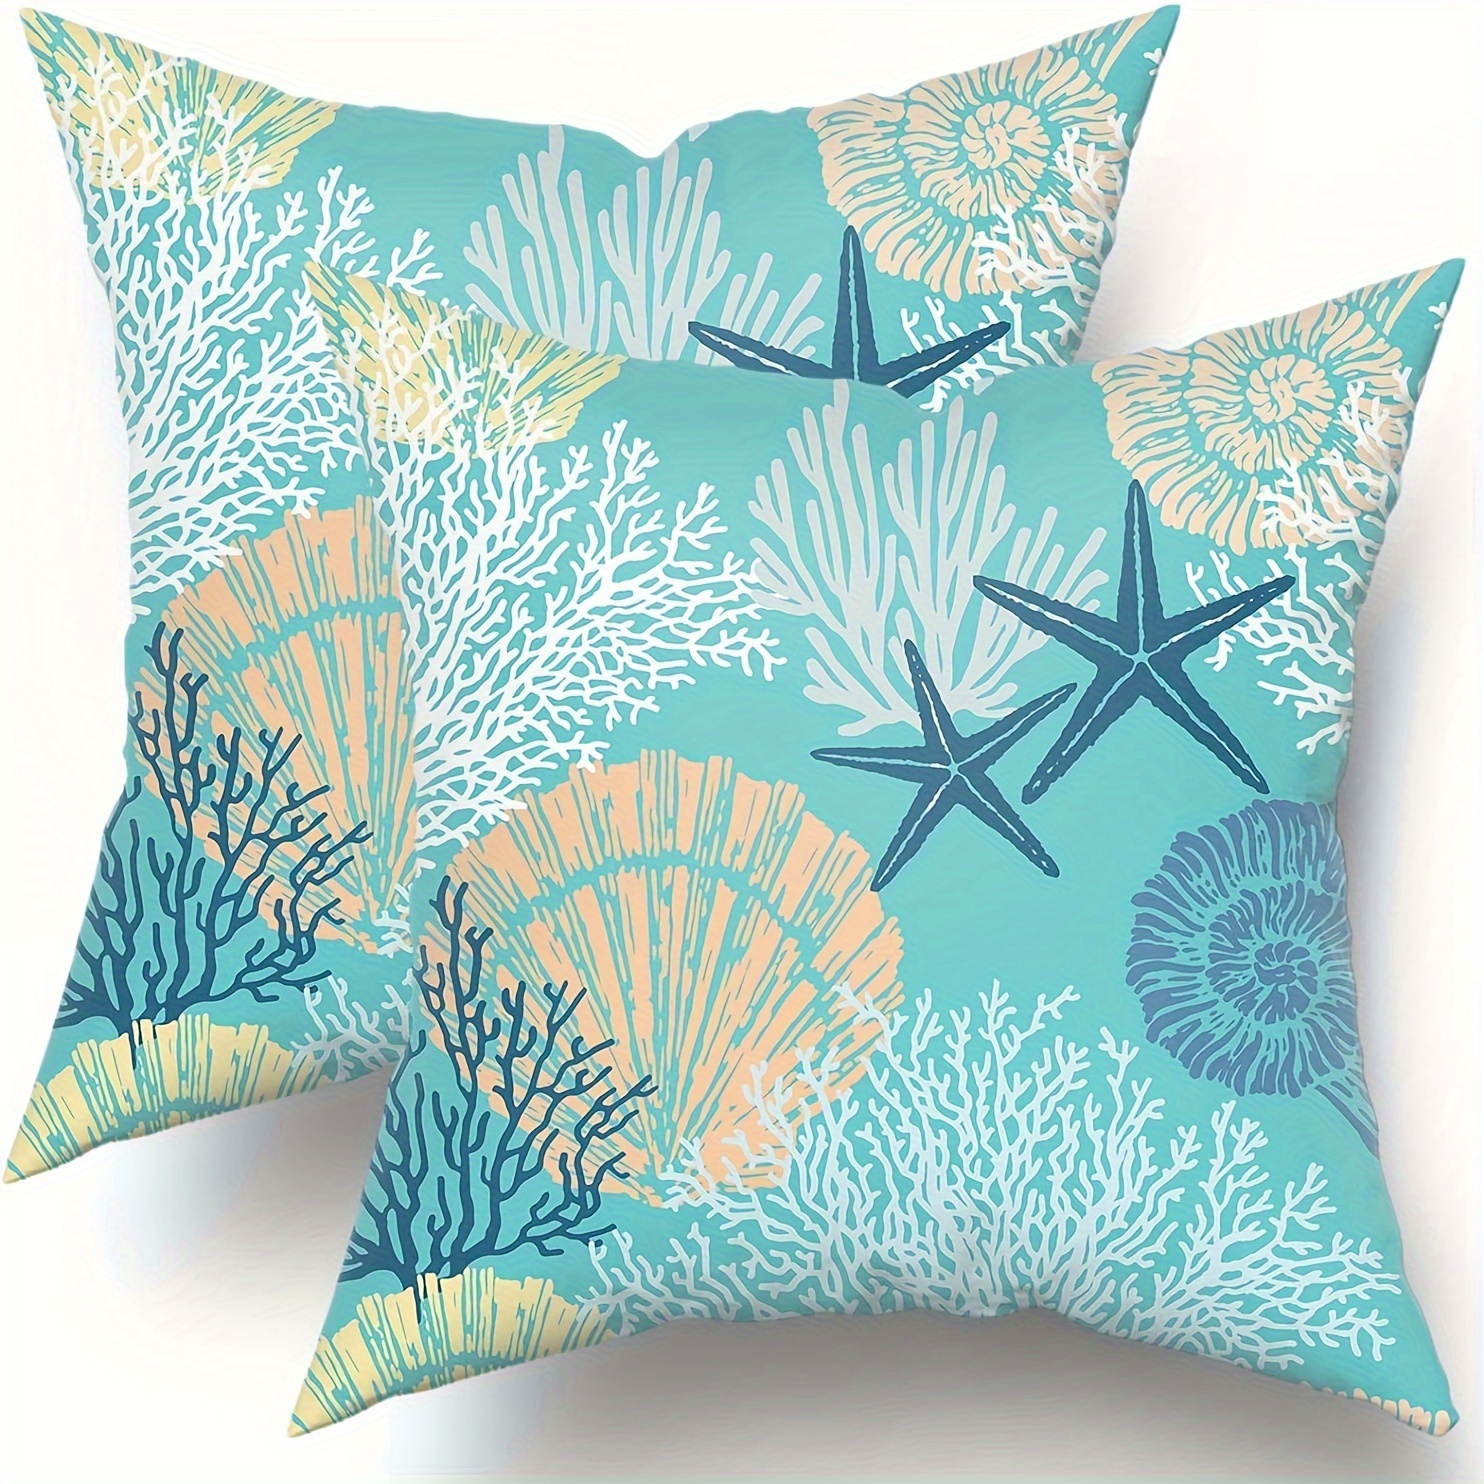 

2pcs, Ocean Coral Pillow Covers 18x18 Inch Nautical Coastal Throw Pillows Beach Seashell Starfish Pillow Case Soft Cotton Square Cushion Covers For Home Couch Sofa Patio Bedroom